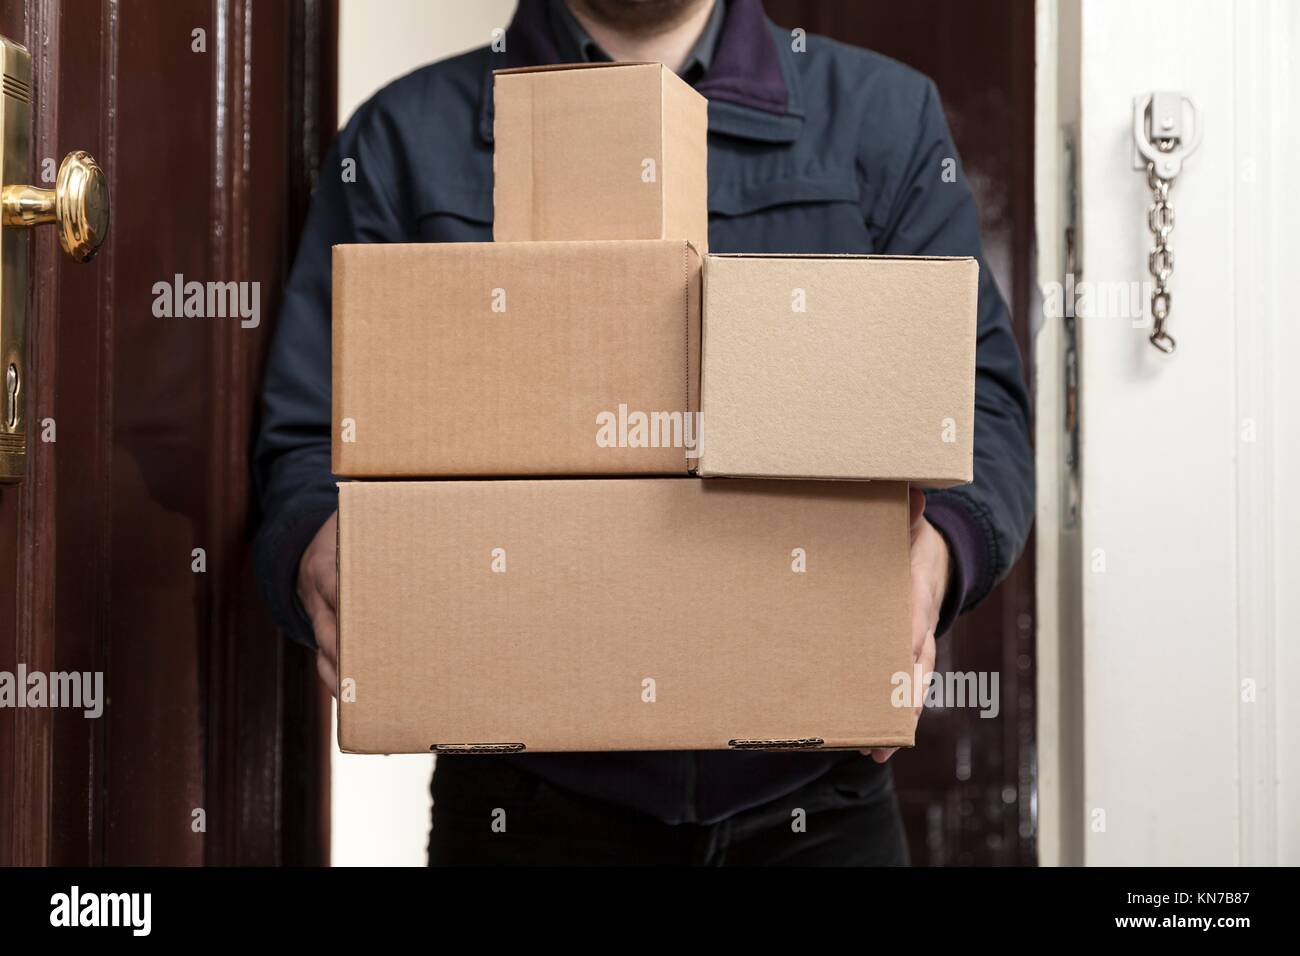 Postman brings a lot packages. Stock Photo